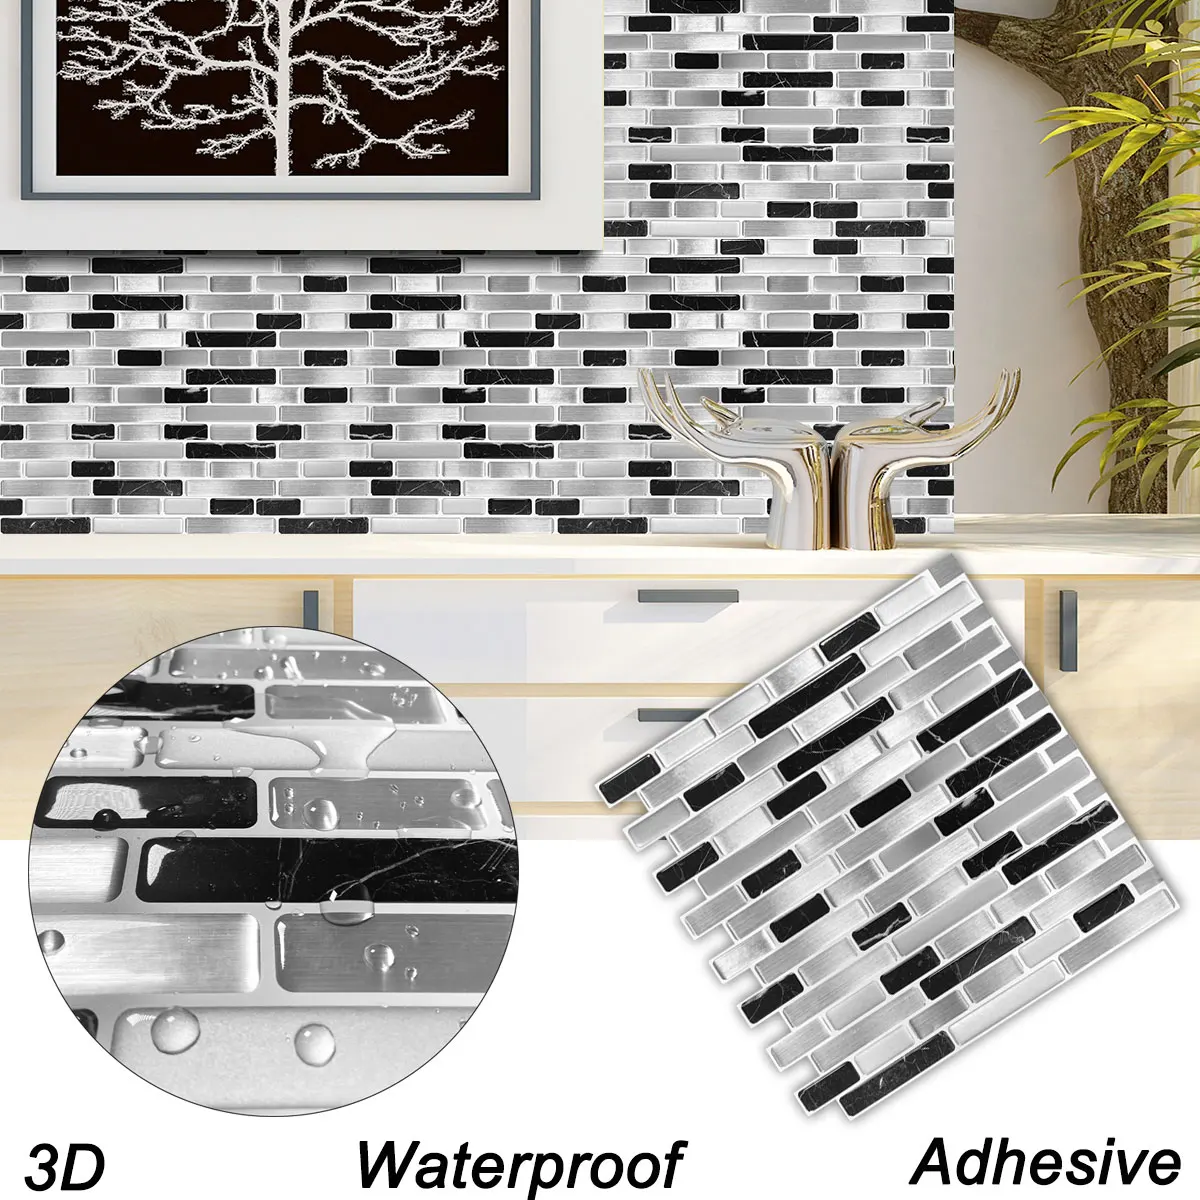 

Easytiles Self Adhesive 3D Wall Tiles Peel and Stick Wallpaper Removable for Kitchen Living Room Decor - 1 Sheet